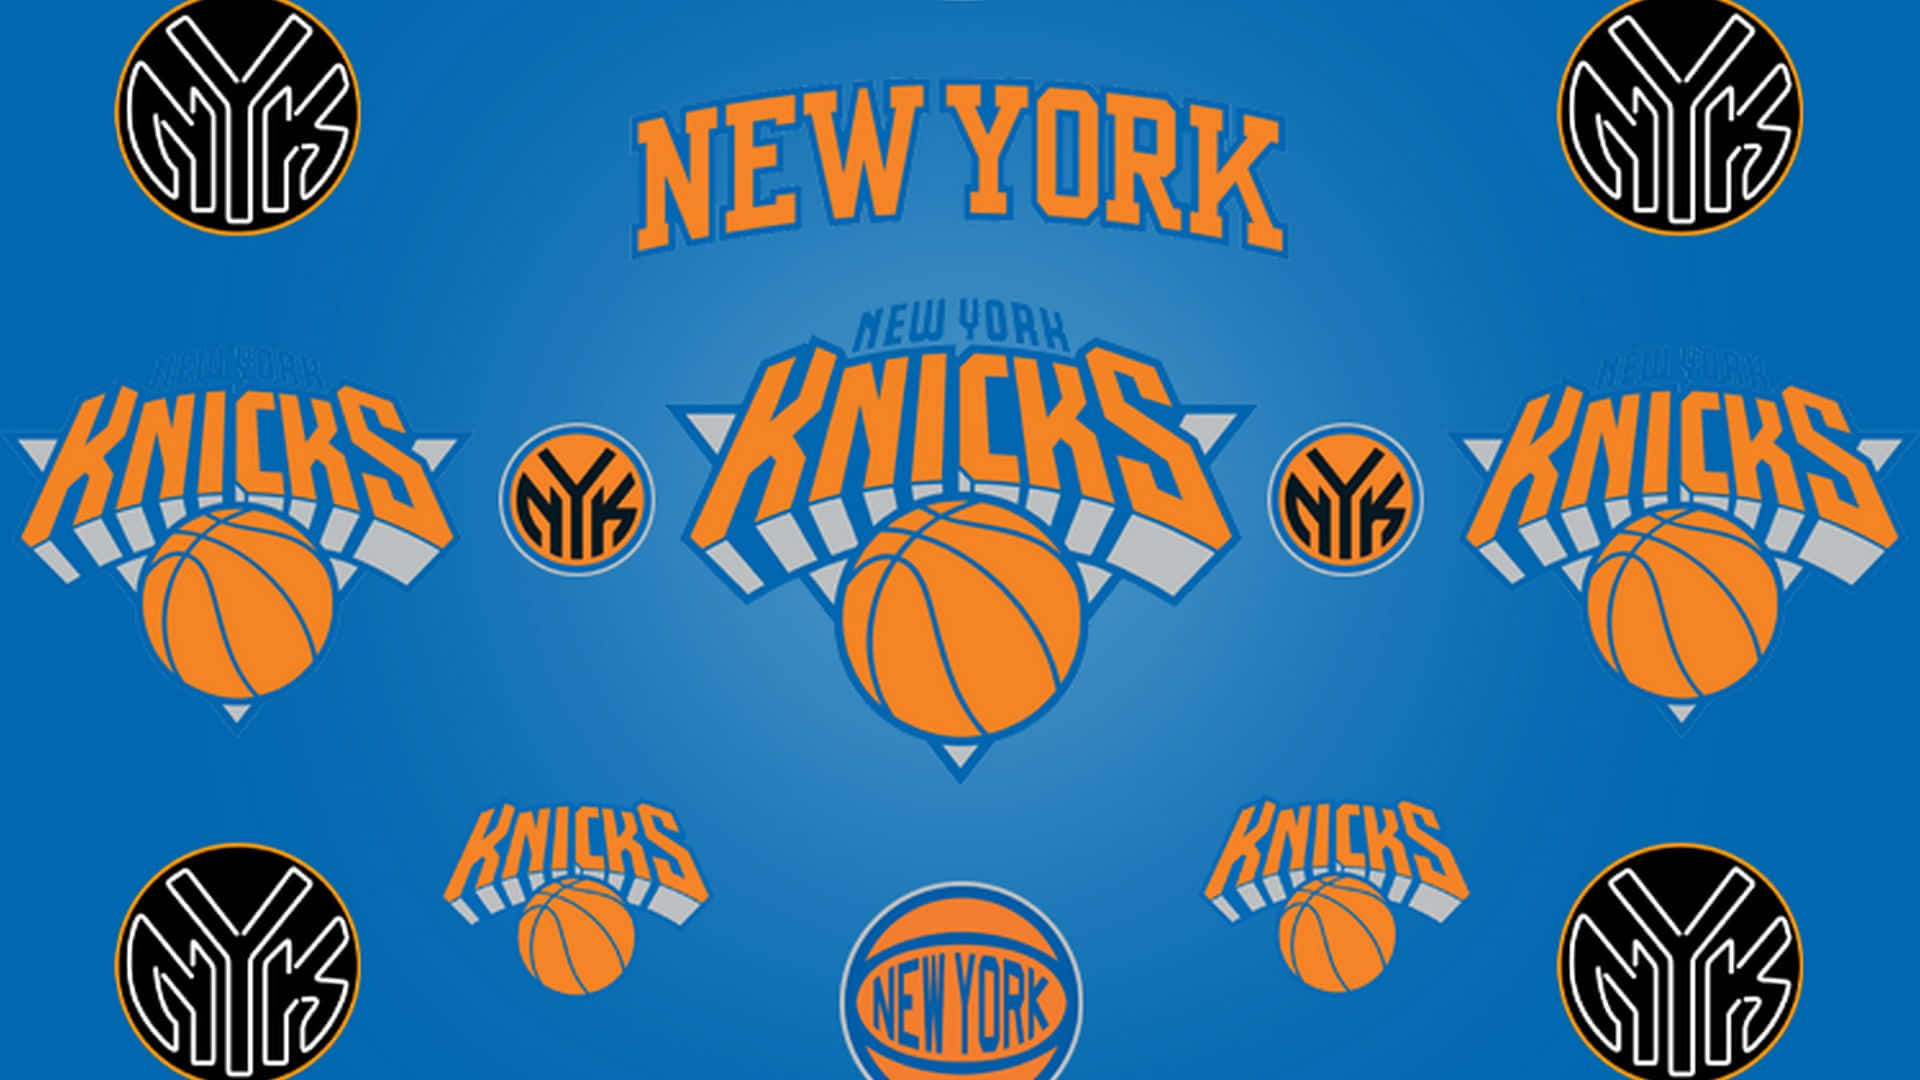 Follow the New York Knicks on their journey to the top! Wallpaper